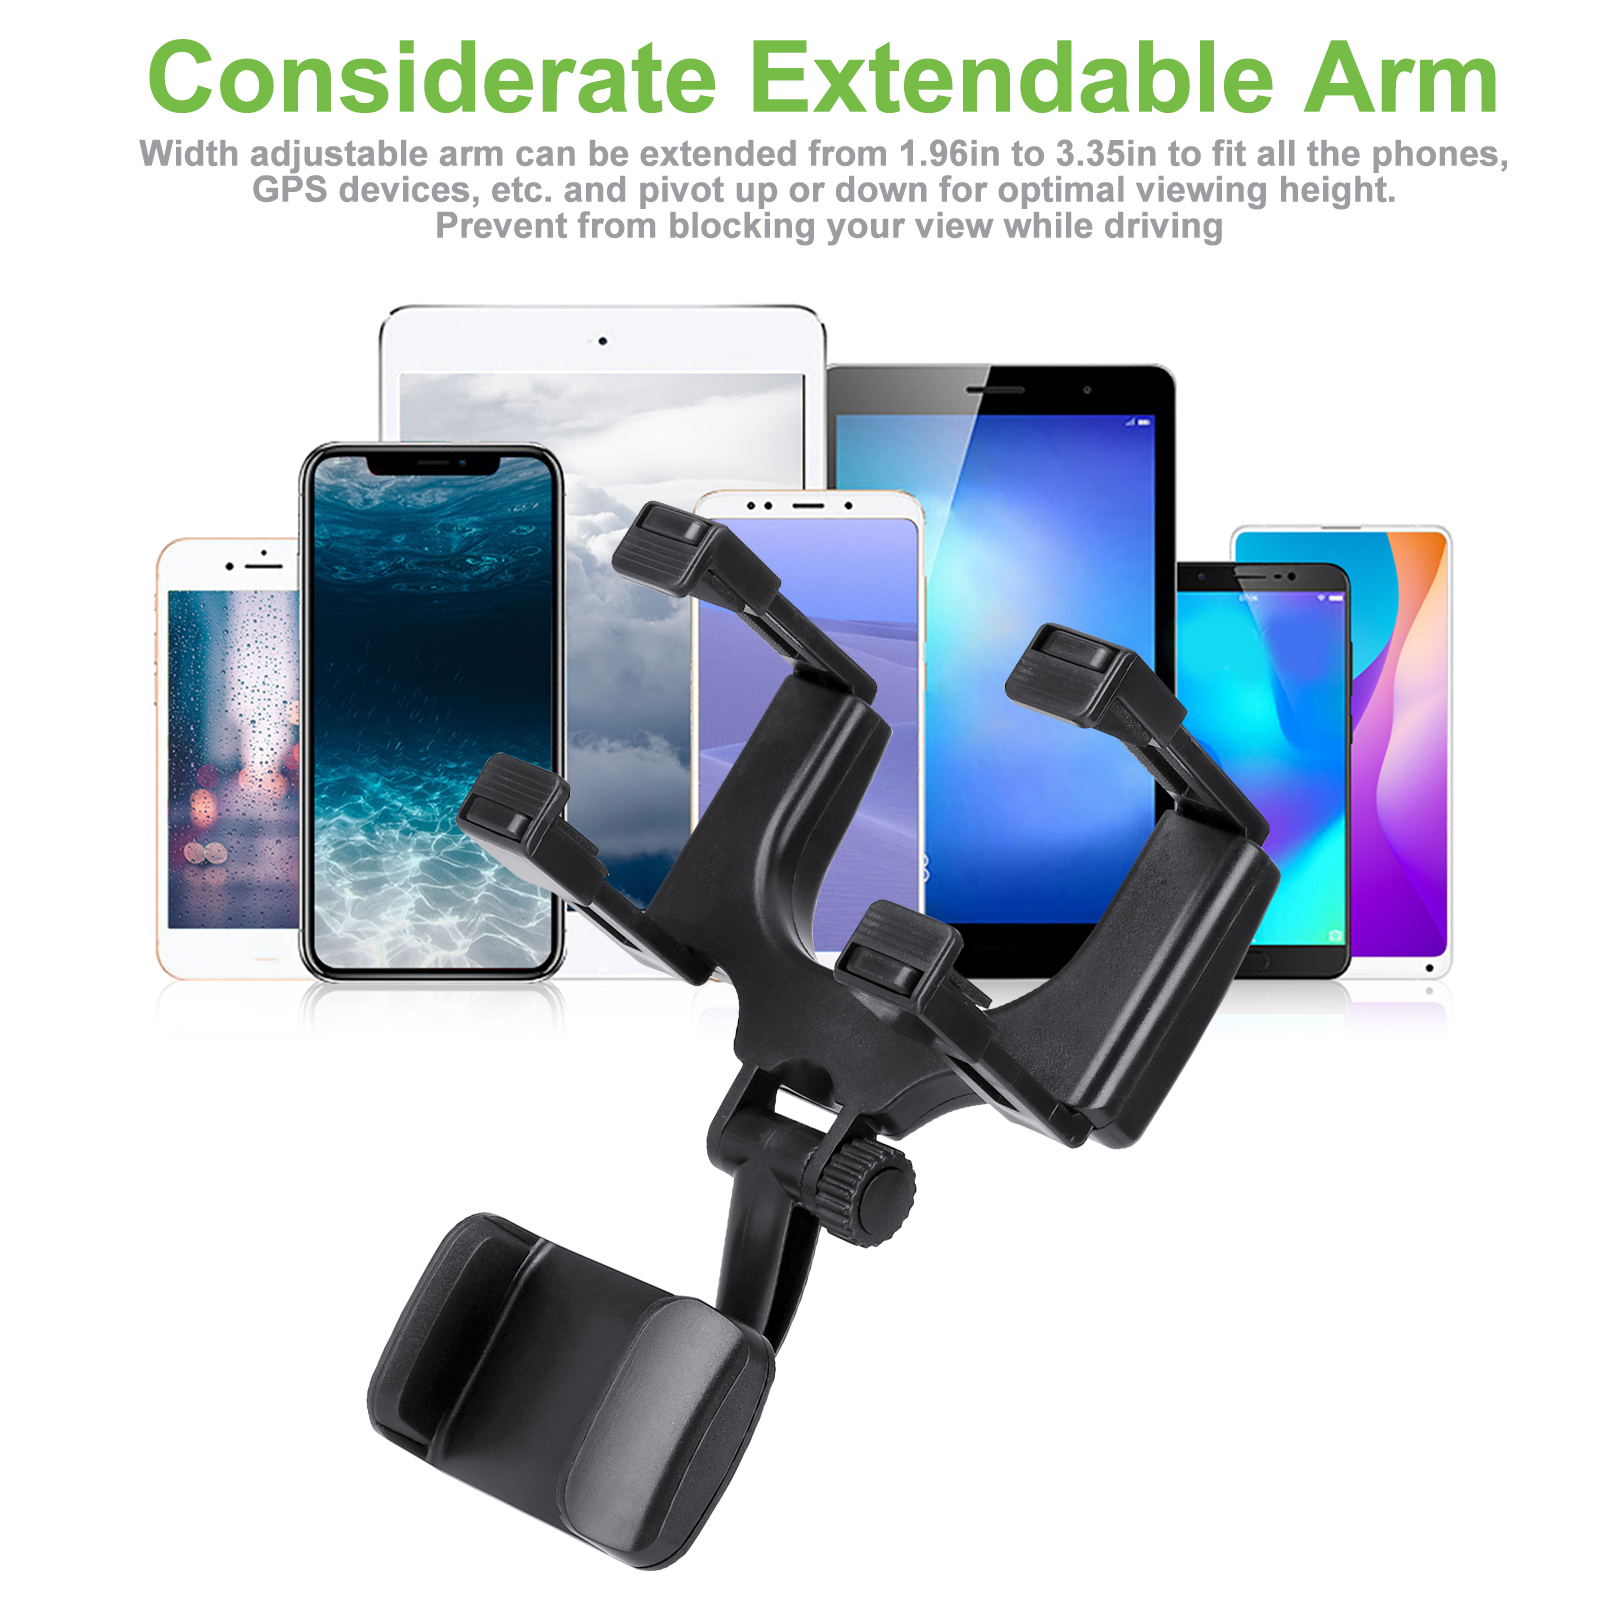 TSV Car Rear View Mirror Mount Grip Clip, 240 Rotation Car Mount Holder, Universal Smartphone Holders Cell Phone Mount Fit for iPhone 13/12/11 Pro Xr Xs Max X, Samsung S21/Galaxy, HTC, GPS, Smartphone - image 2 of 9